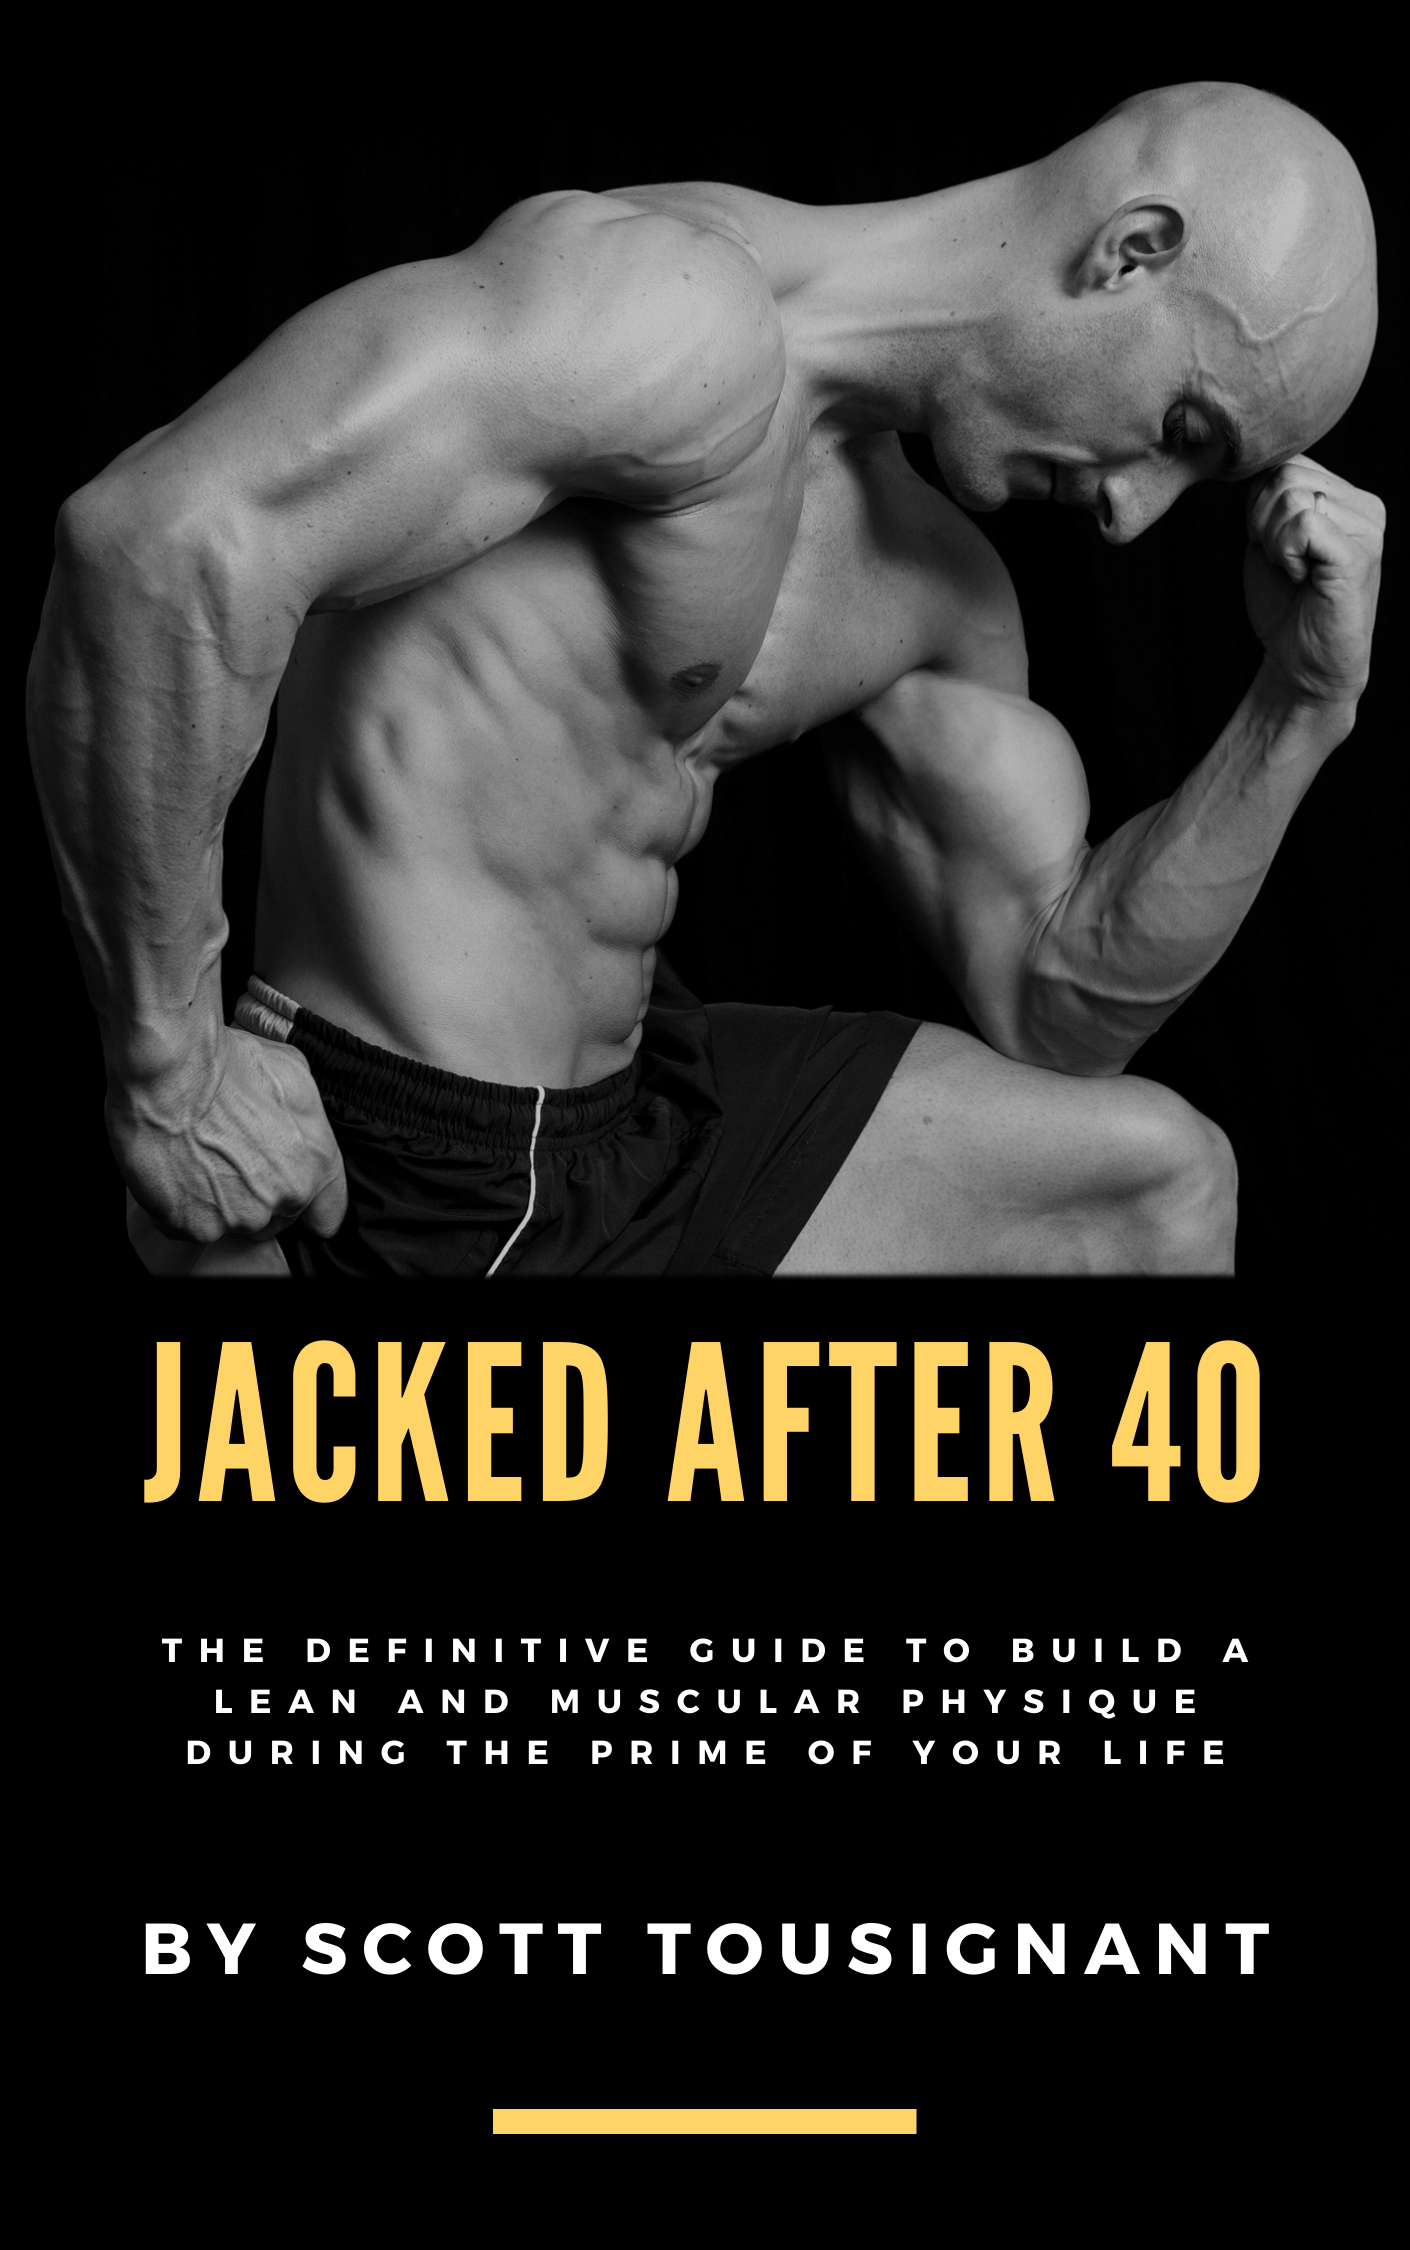 Jacked After 40 FREE Guide - How To Build Muscle After 40